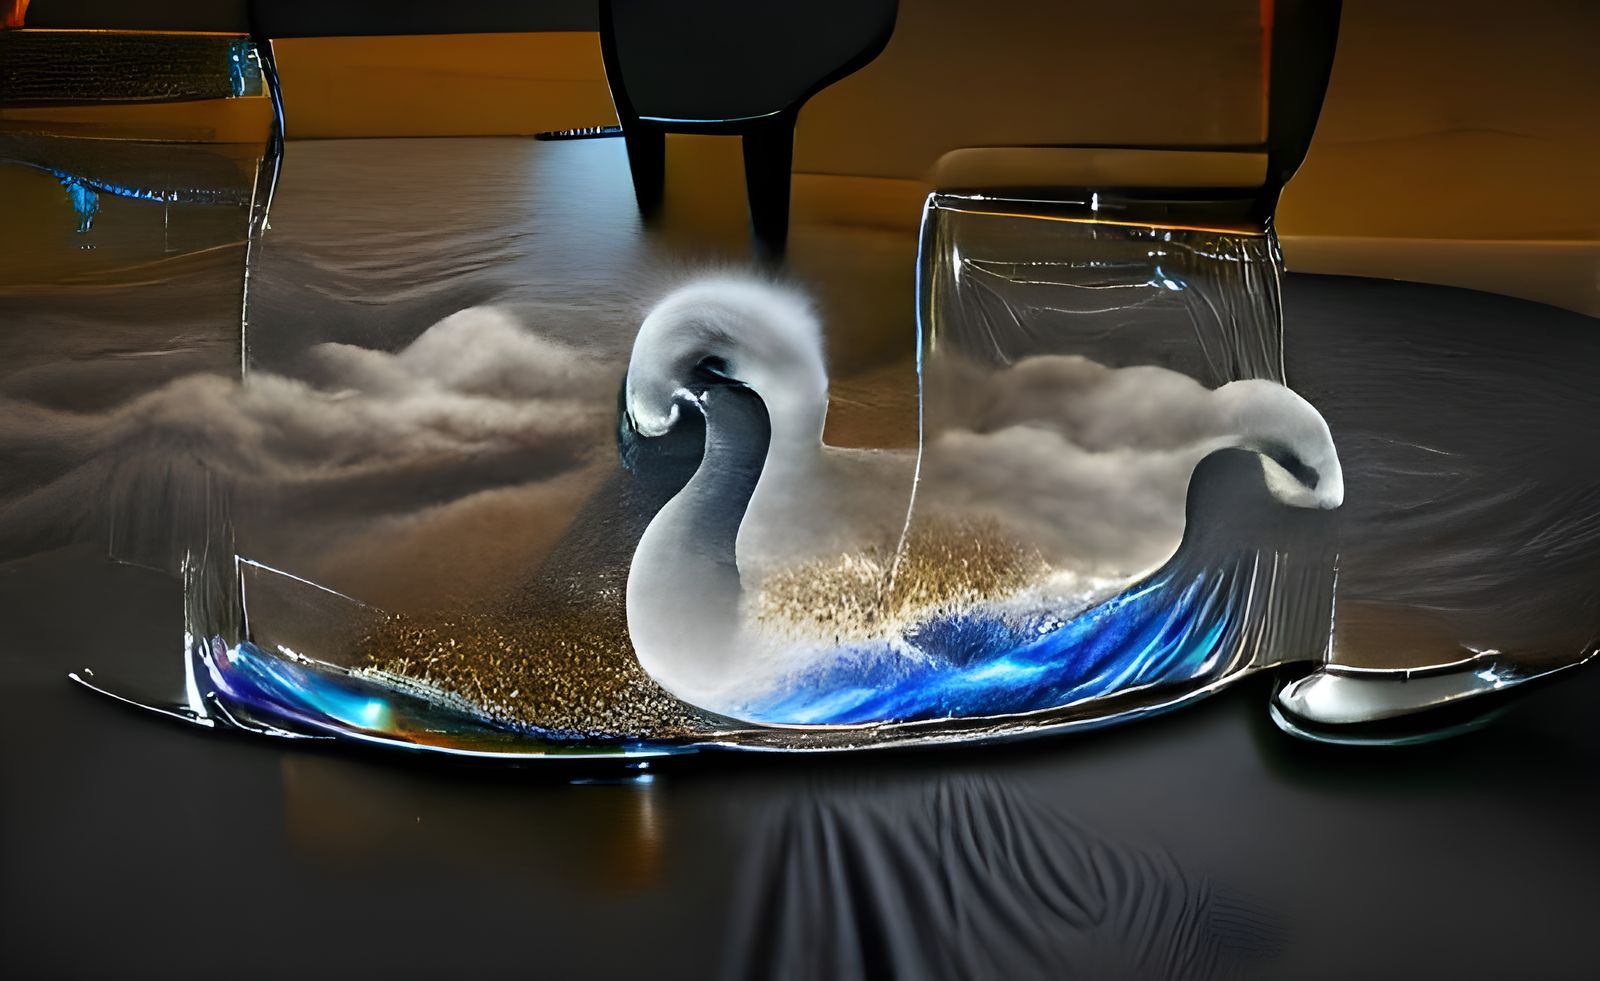 The swan in the clouds